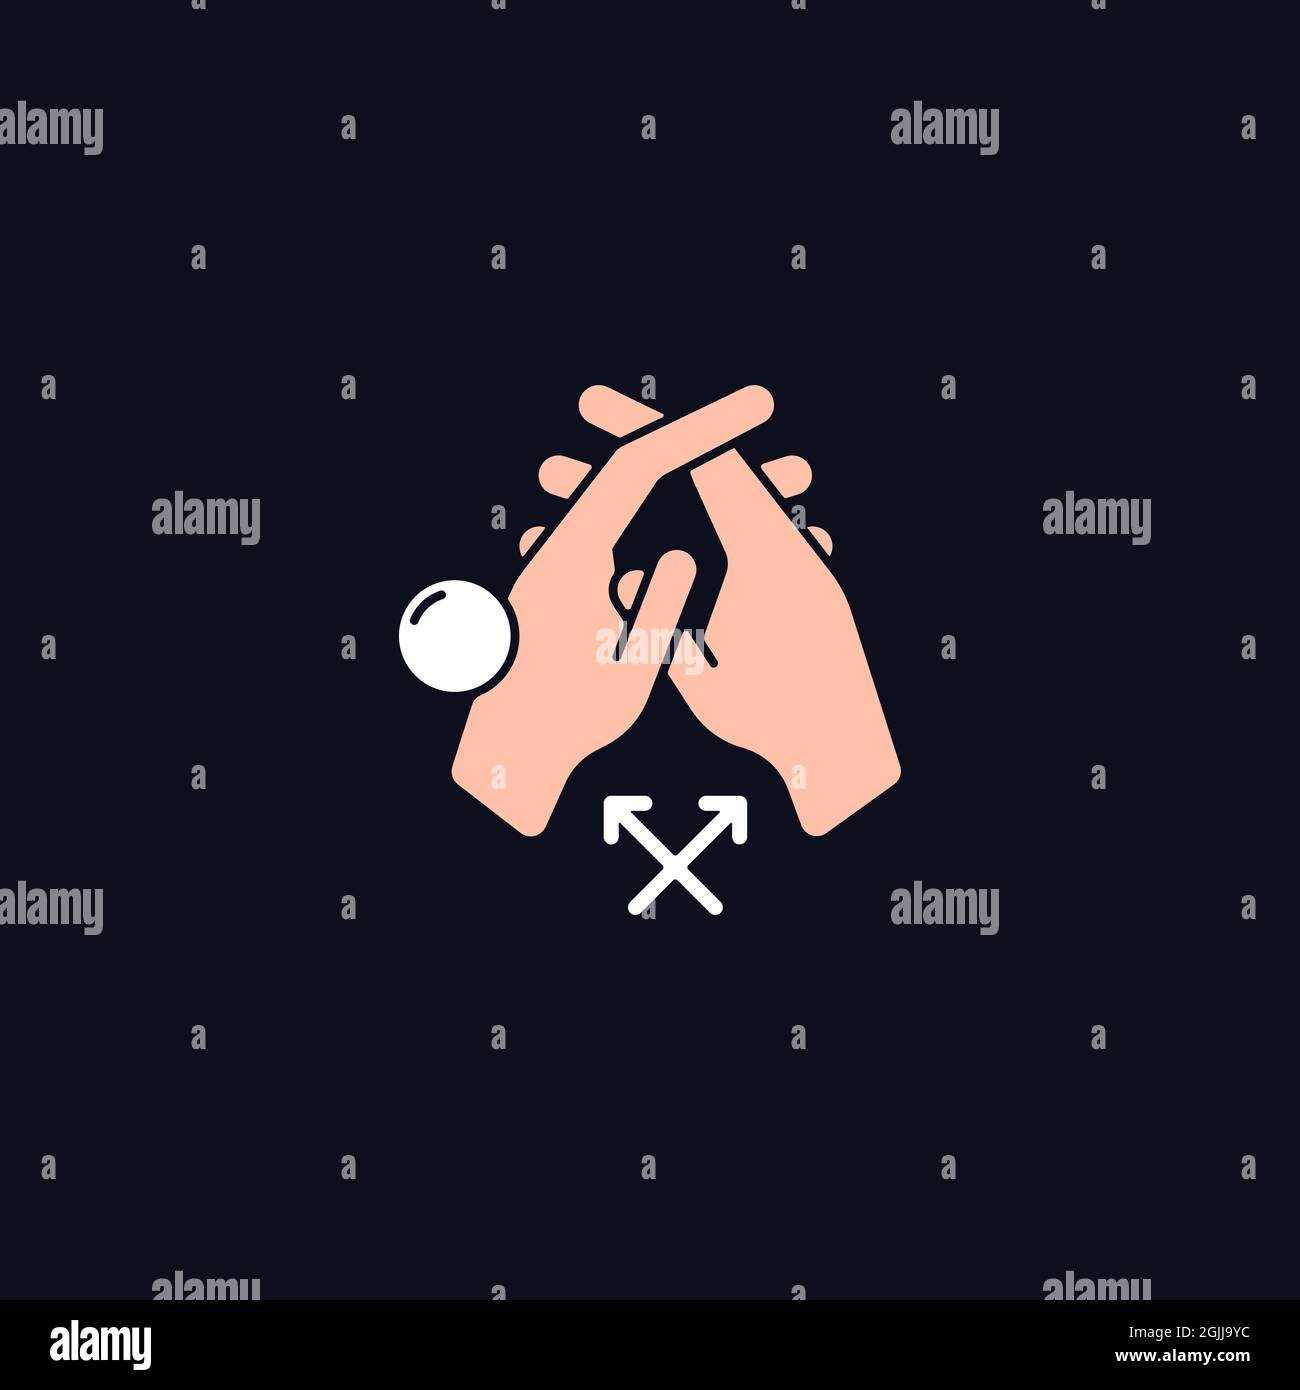 Interlink fingers RGB color icon for dark theme Stock Vector